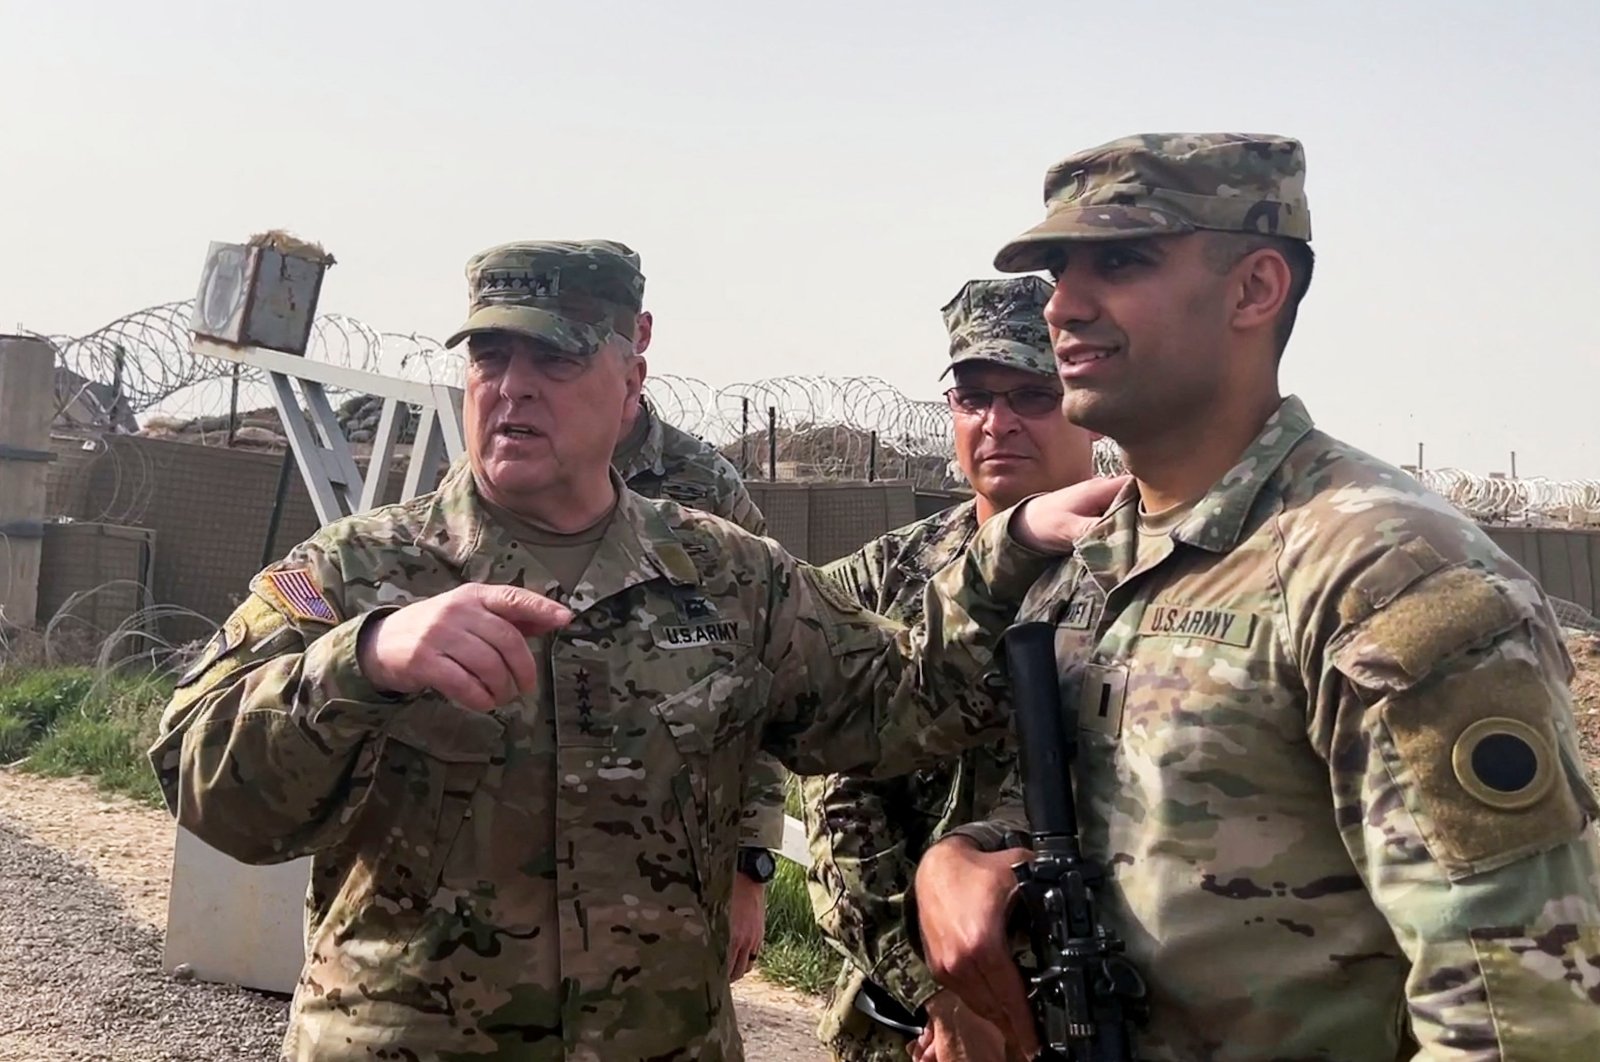 U.S. Joint Chiefs Chair Army General Mark Milley speaks with U.S. forces in Syria during an unannounced visit, at a U.S. military base in Northeast Syria, March 4, 2023. (Reuters Photo)